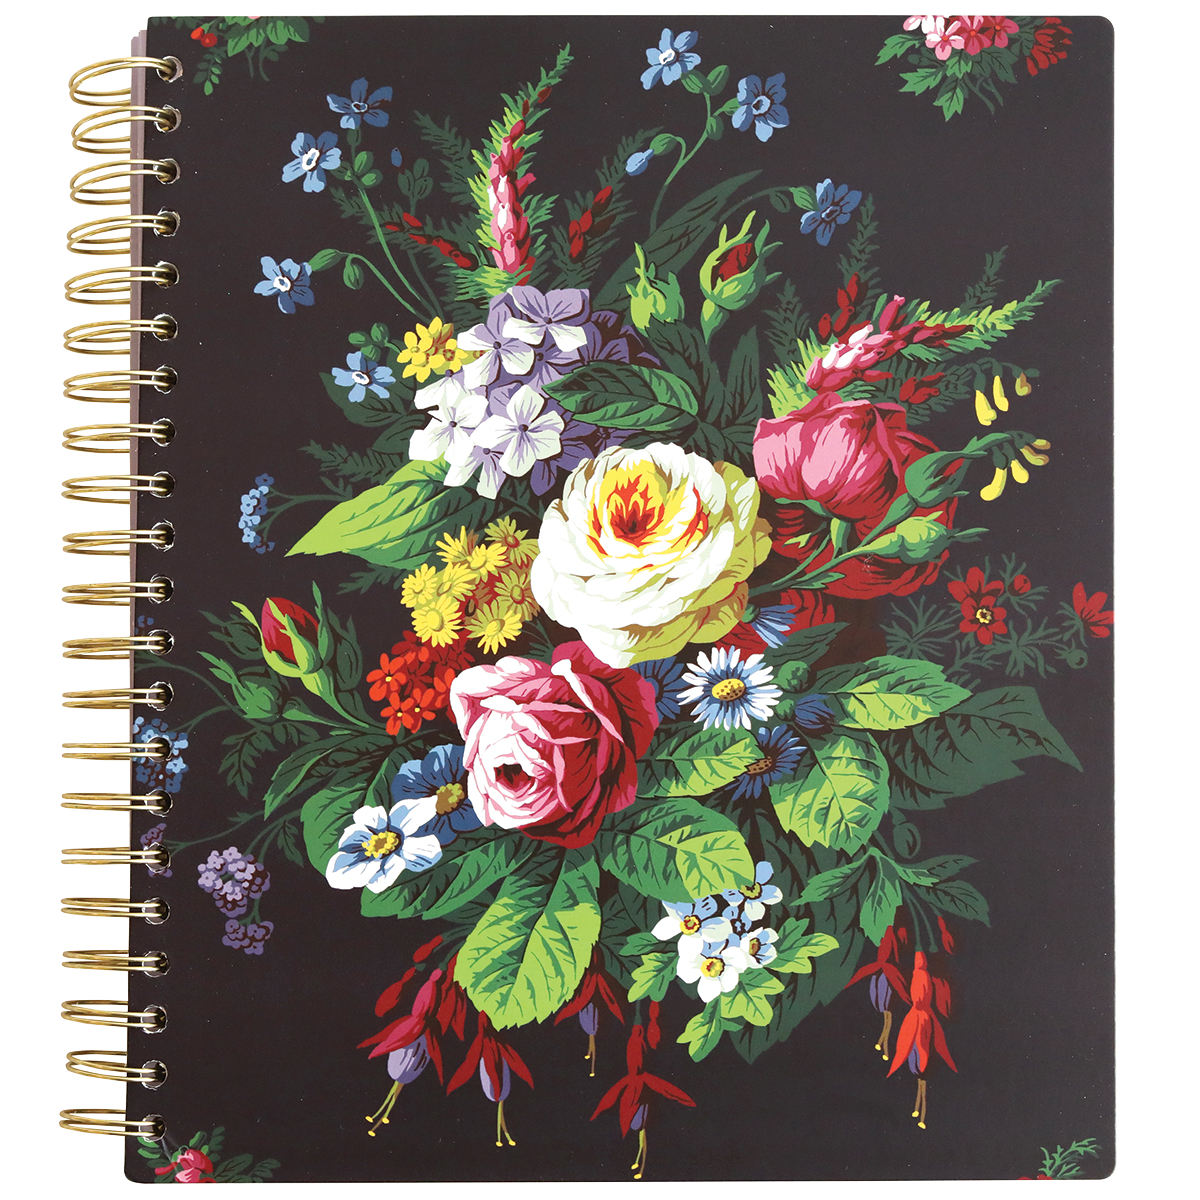 Spiral-bound Astrid Floral Spiral Notebook with gold foil accents and a colorful floral pattern on the cover.